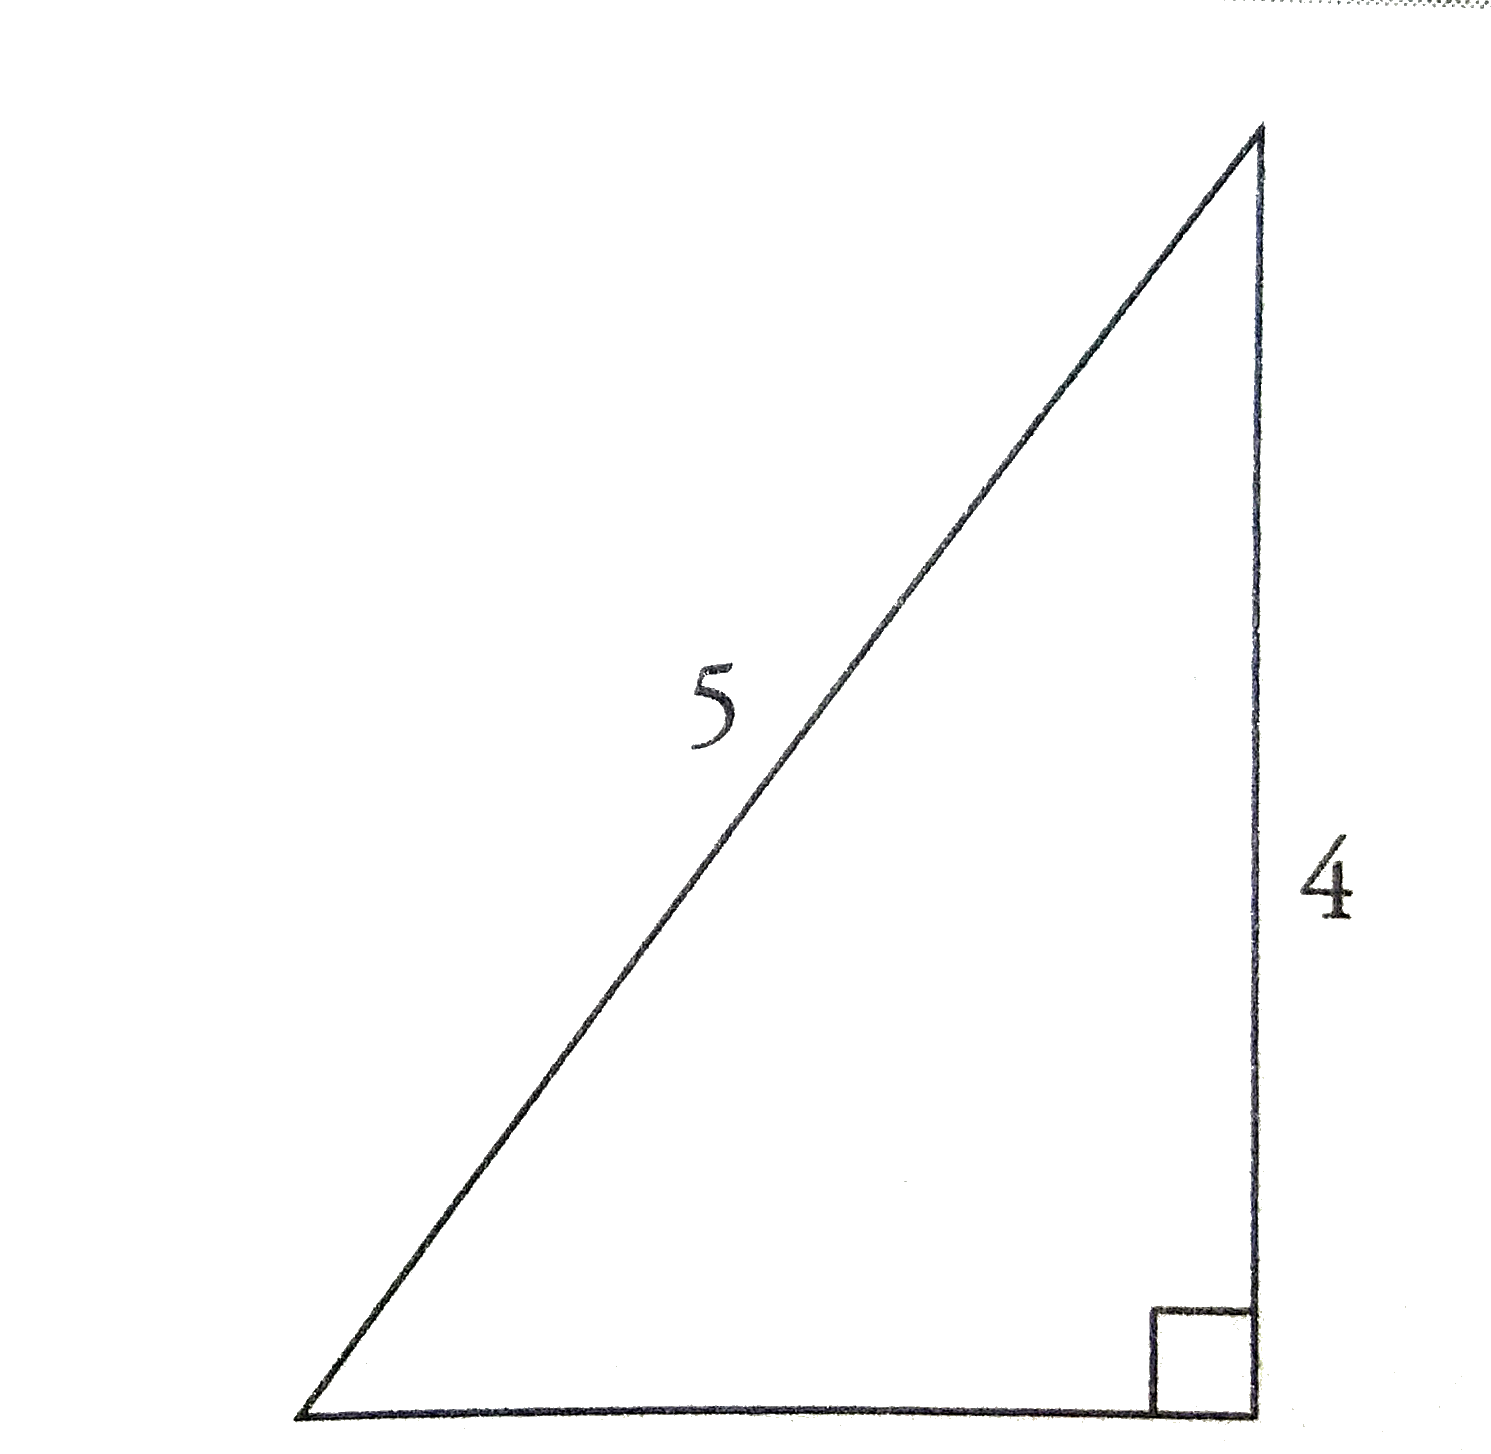 If the area of the triangle above is 6, what is its perimeter?